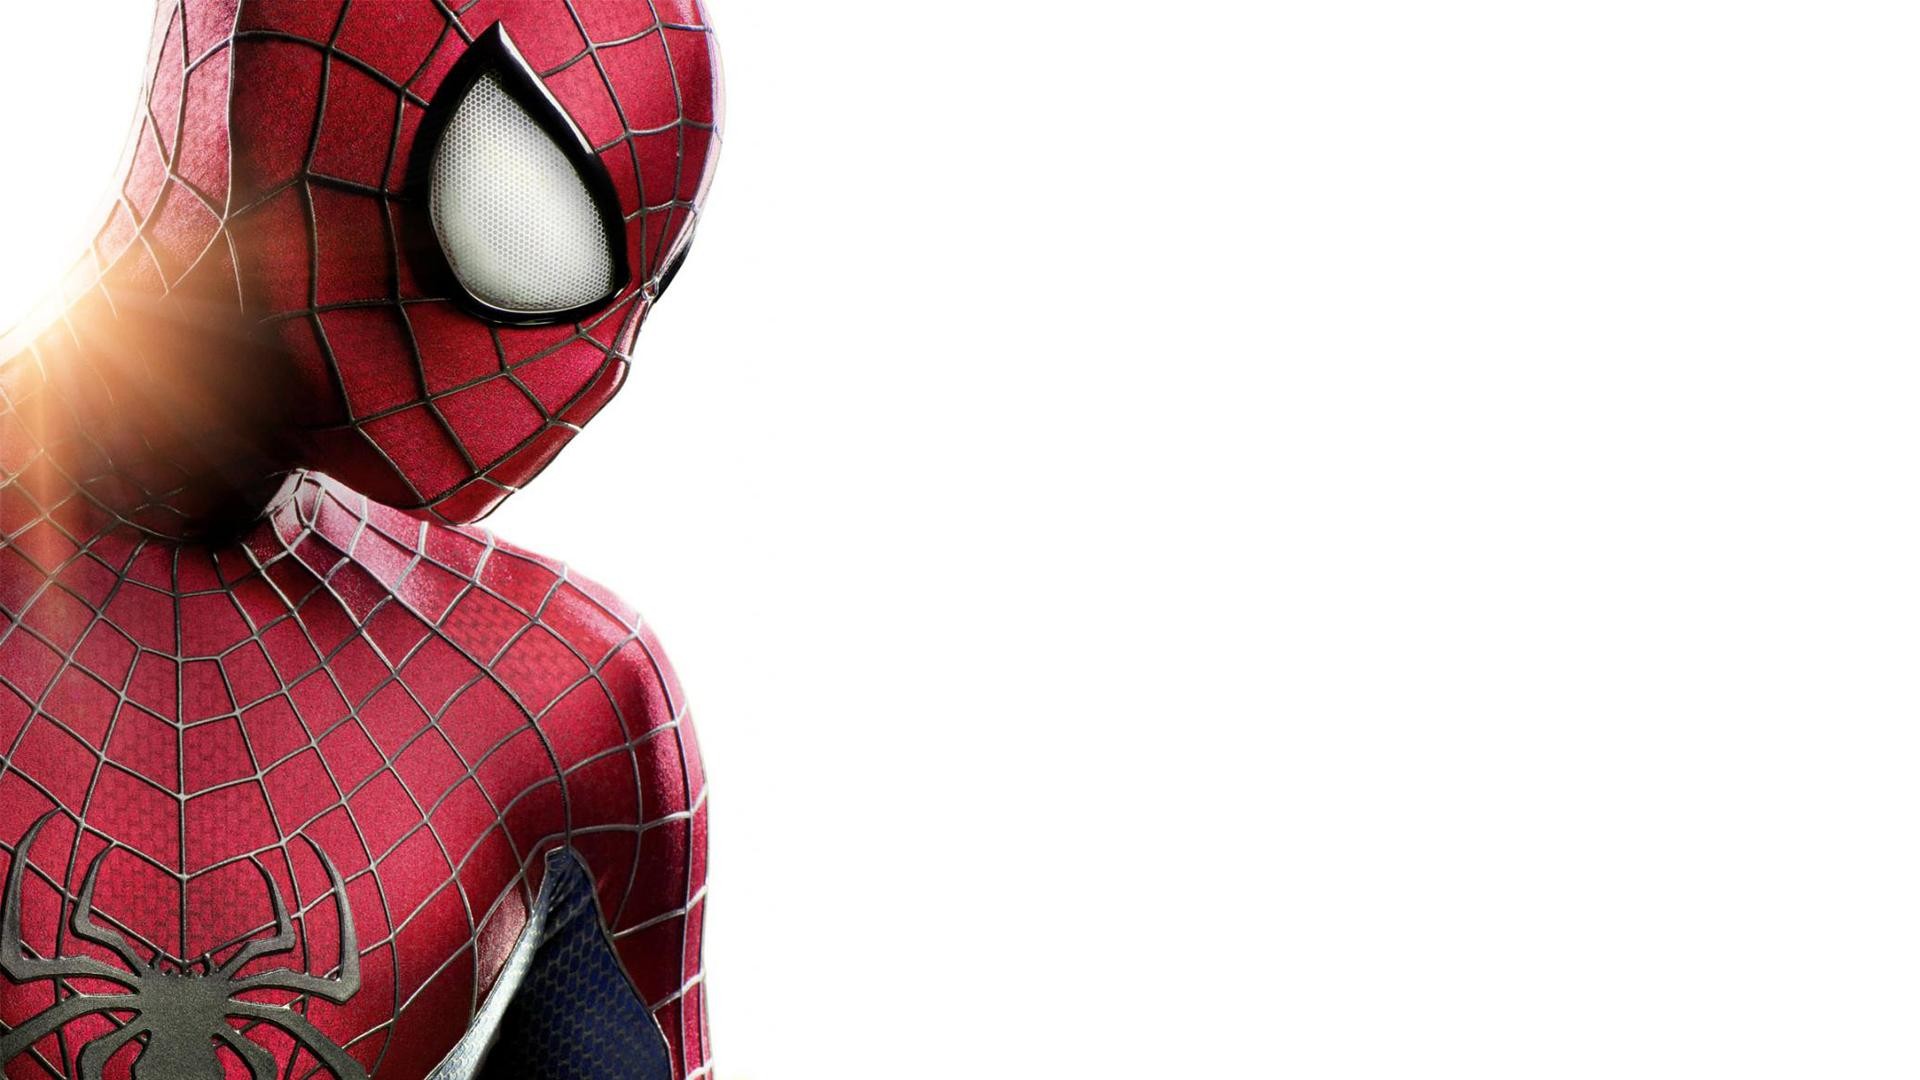 The Amazing Spider Man HD Wallpaper Background Image